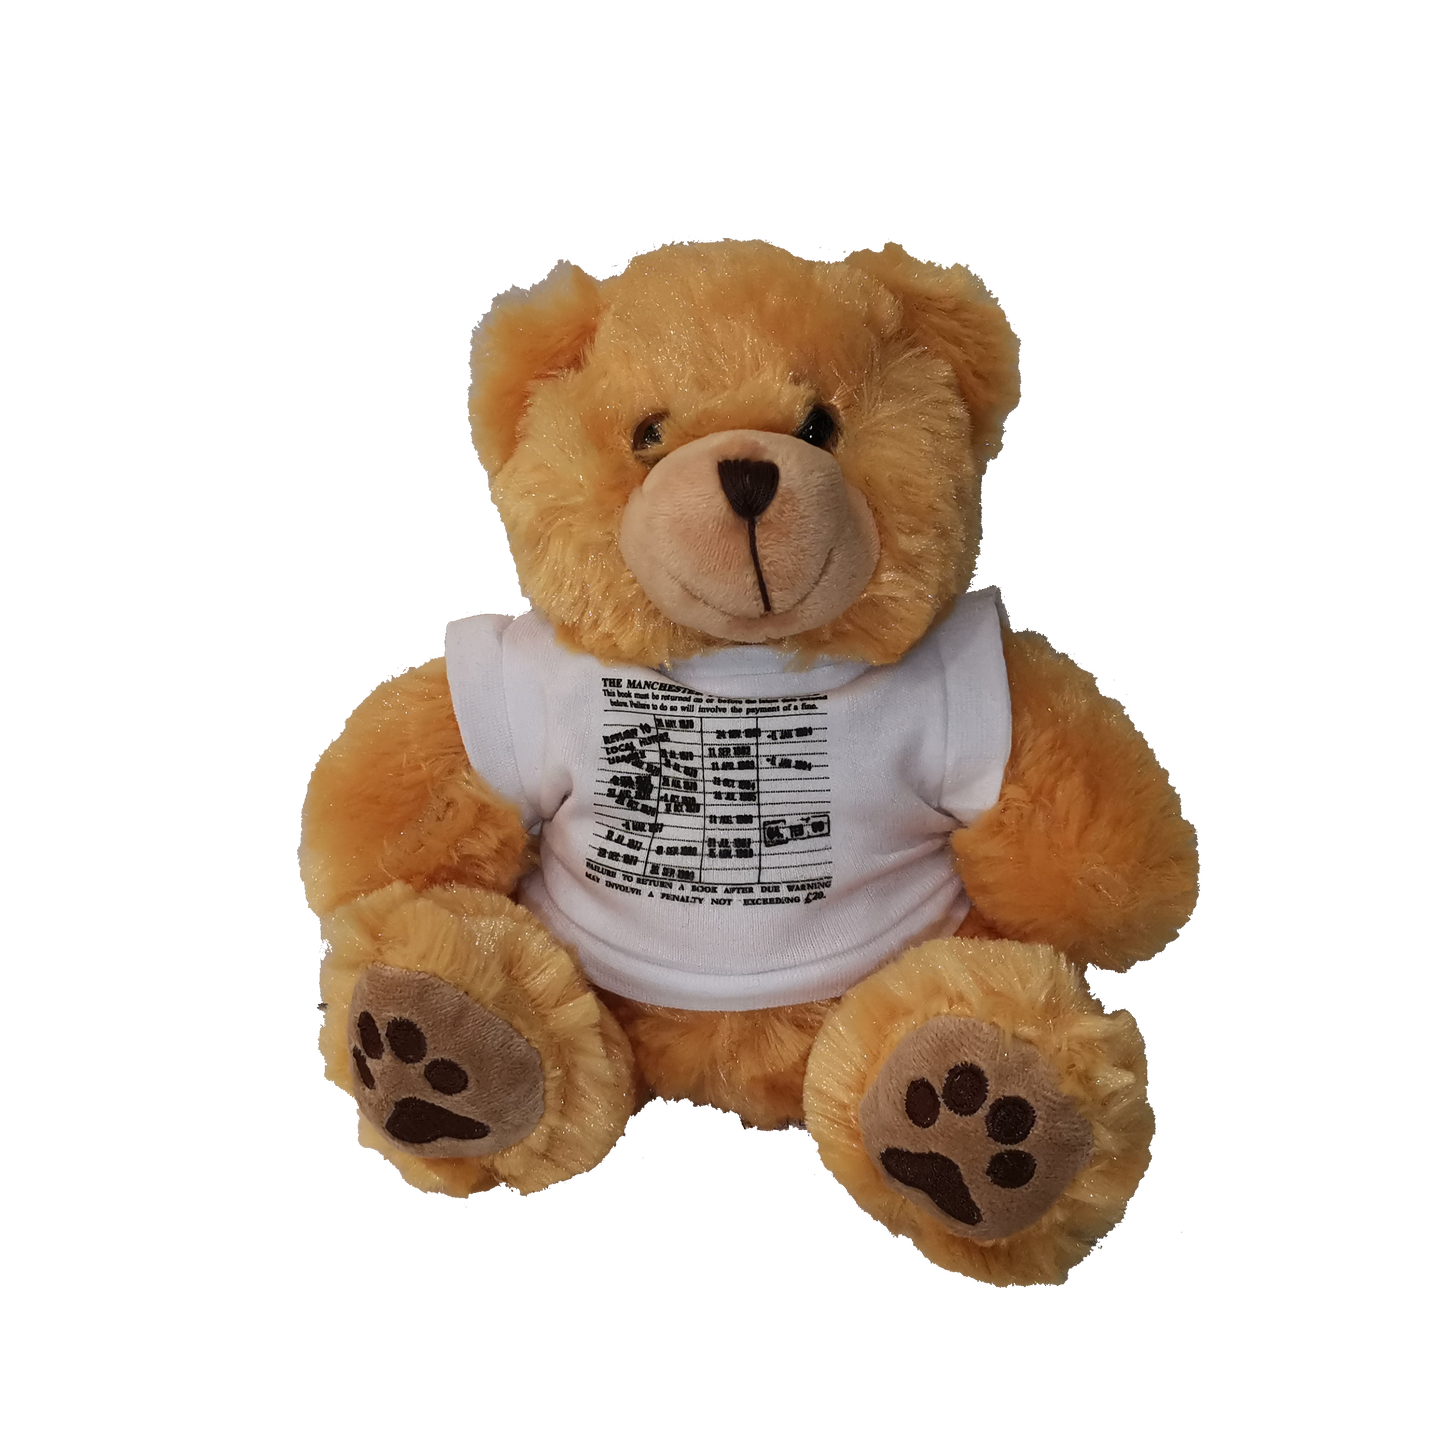 Ten inch golden teddy bear wearing a white library date stamp card t shirt.